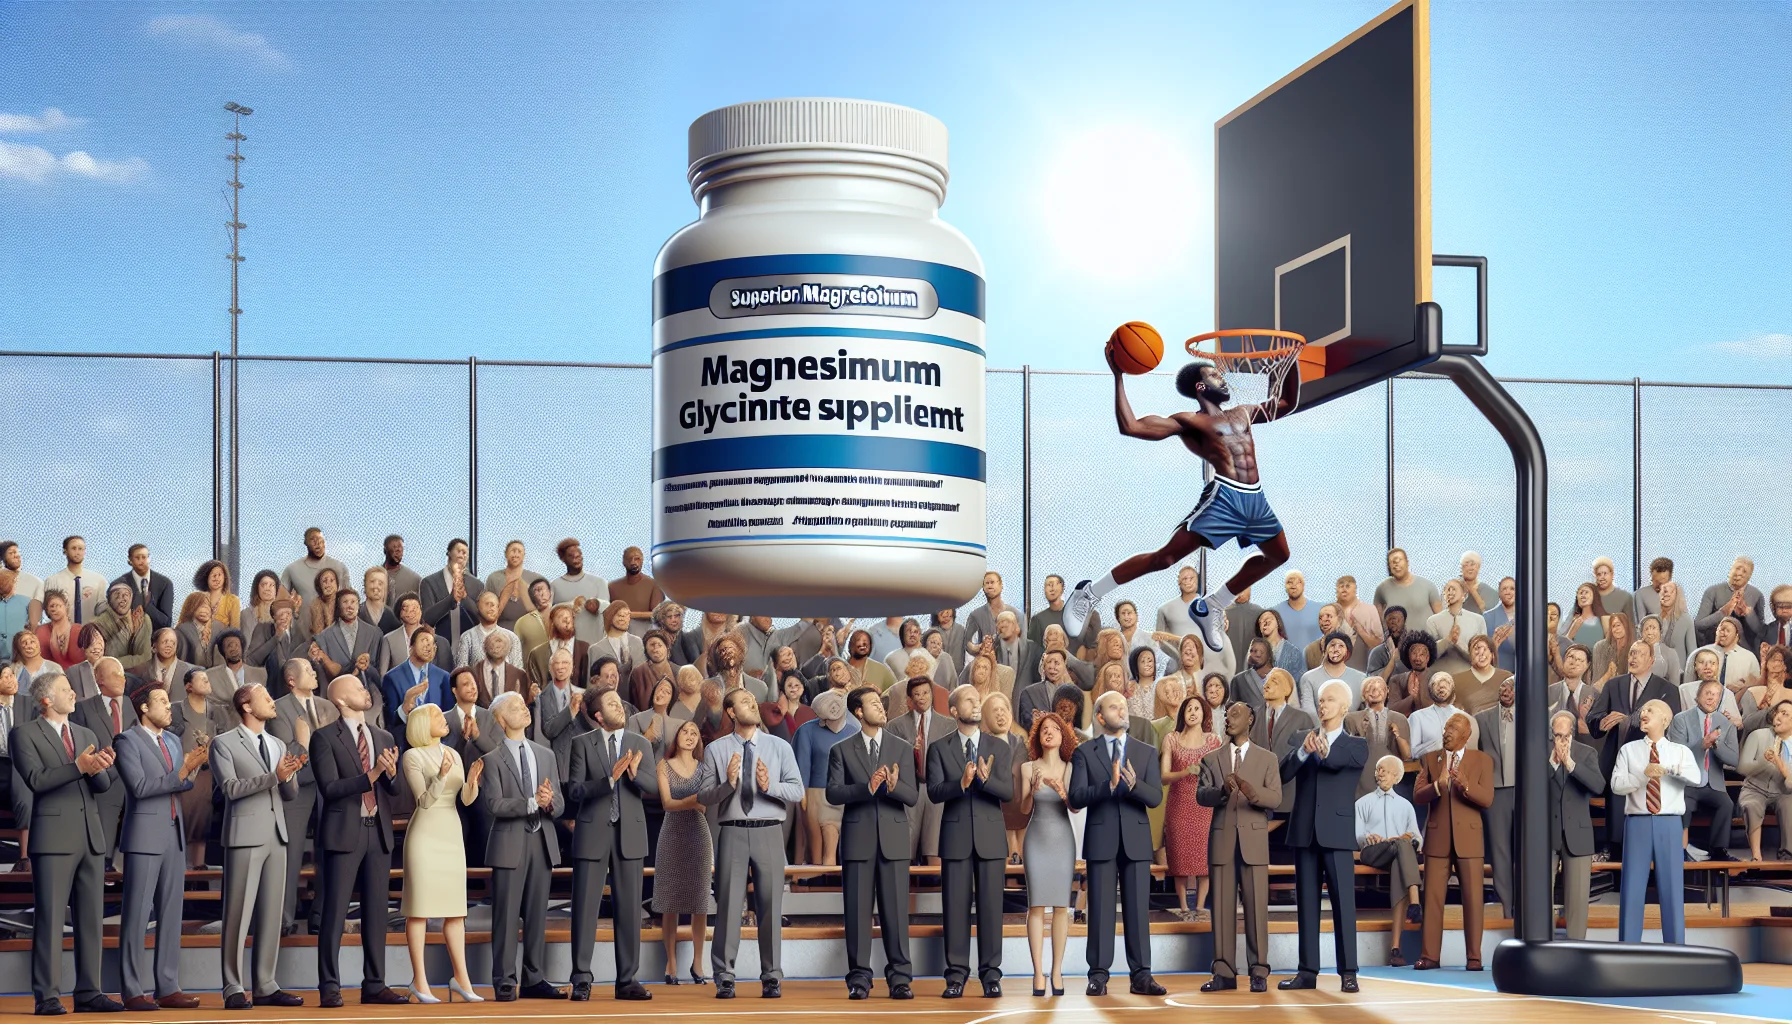 Generate a realistic image of a magnesium glycinate supplement bottle with a label reading 'Superior Magnesium Supplement,' situated in a humorous sports scenario. Visualize the bottle confidently doing a slam dunk on a basketball court, showcasing its agility and strength to a diverse crowd of onlookers. The crowd is composed of a variety of individuals of different genders and descents such as Caucasian, Hispanic, Black, Middle-Eastern, and South Asian. They are all fascinated and amused by the spectacle, which suggests the benefits of using supplements for sports activities.